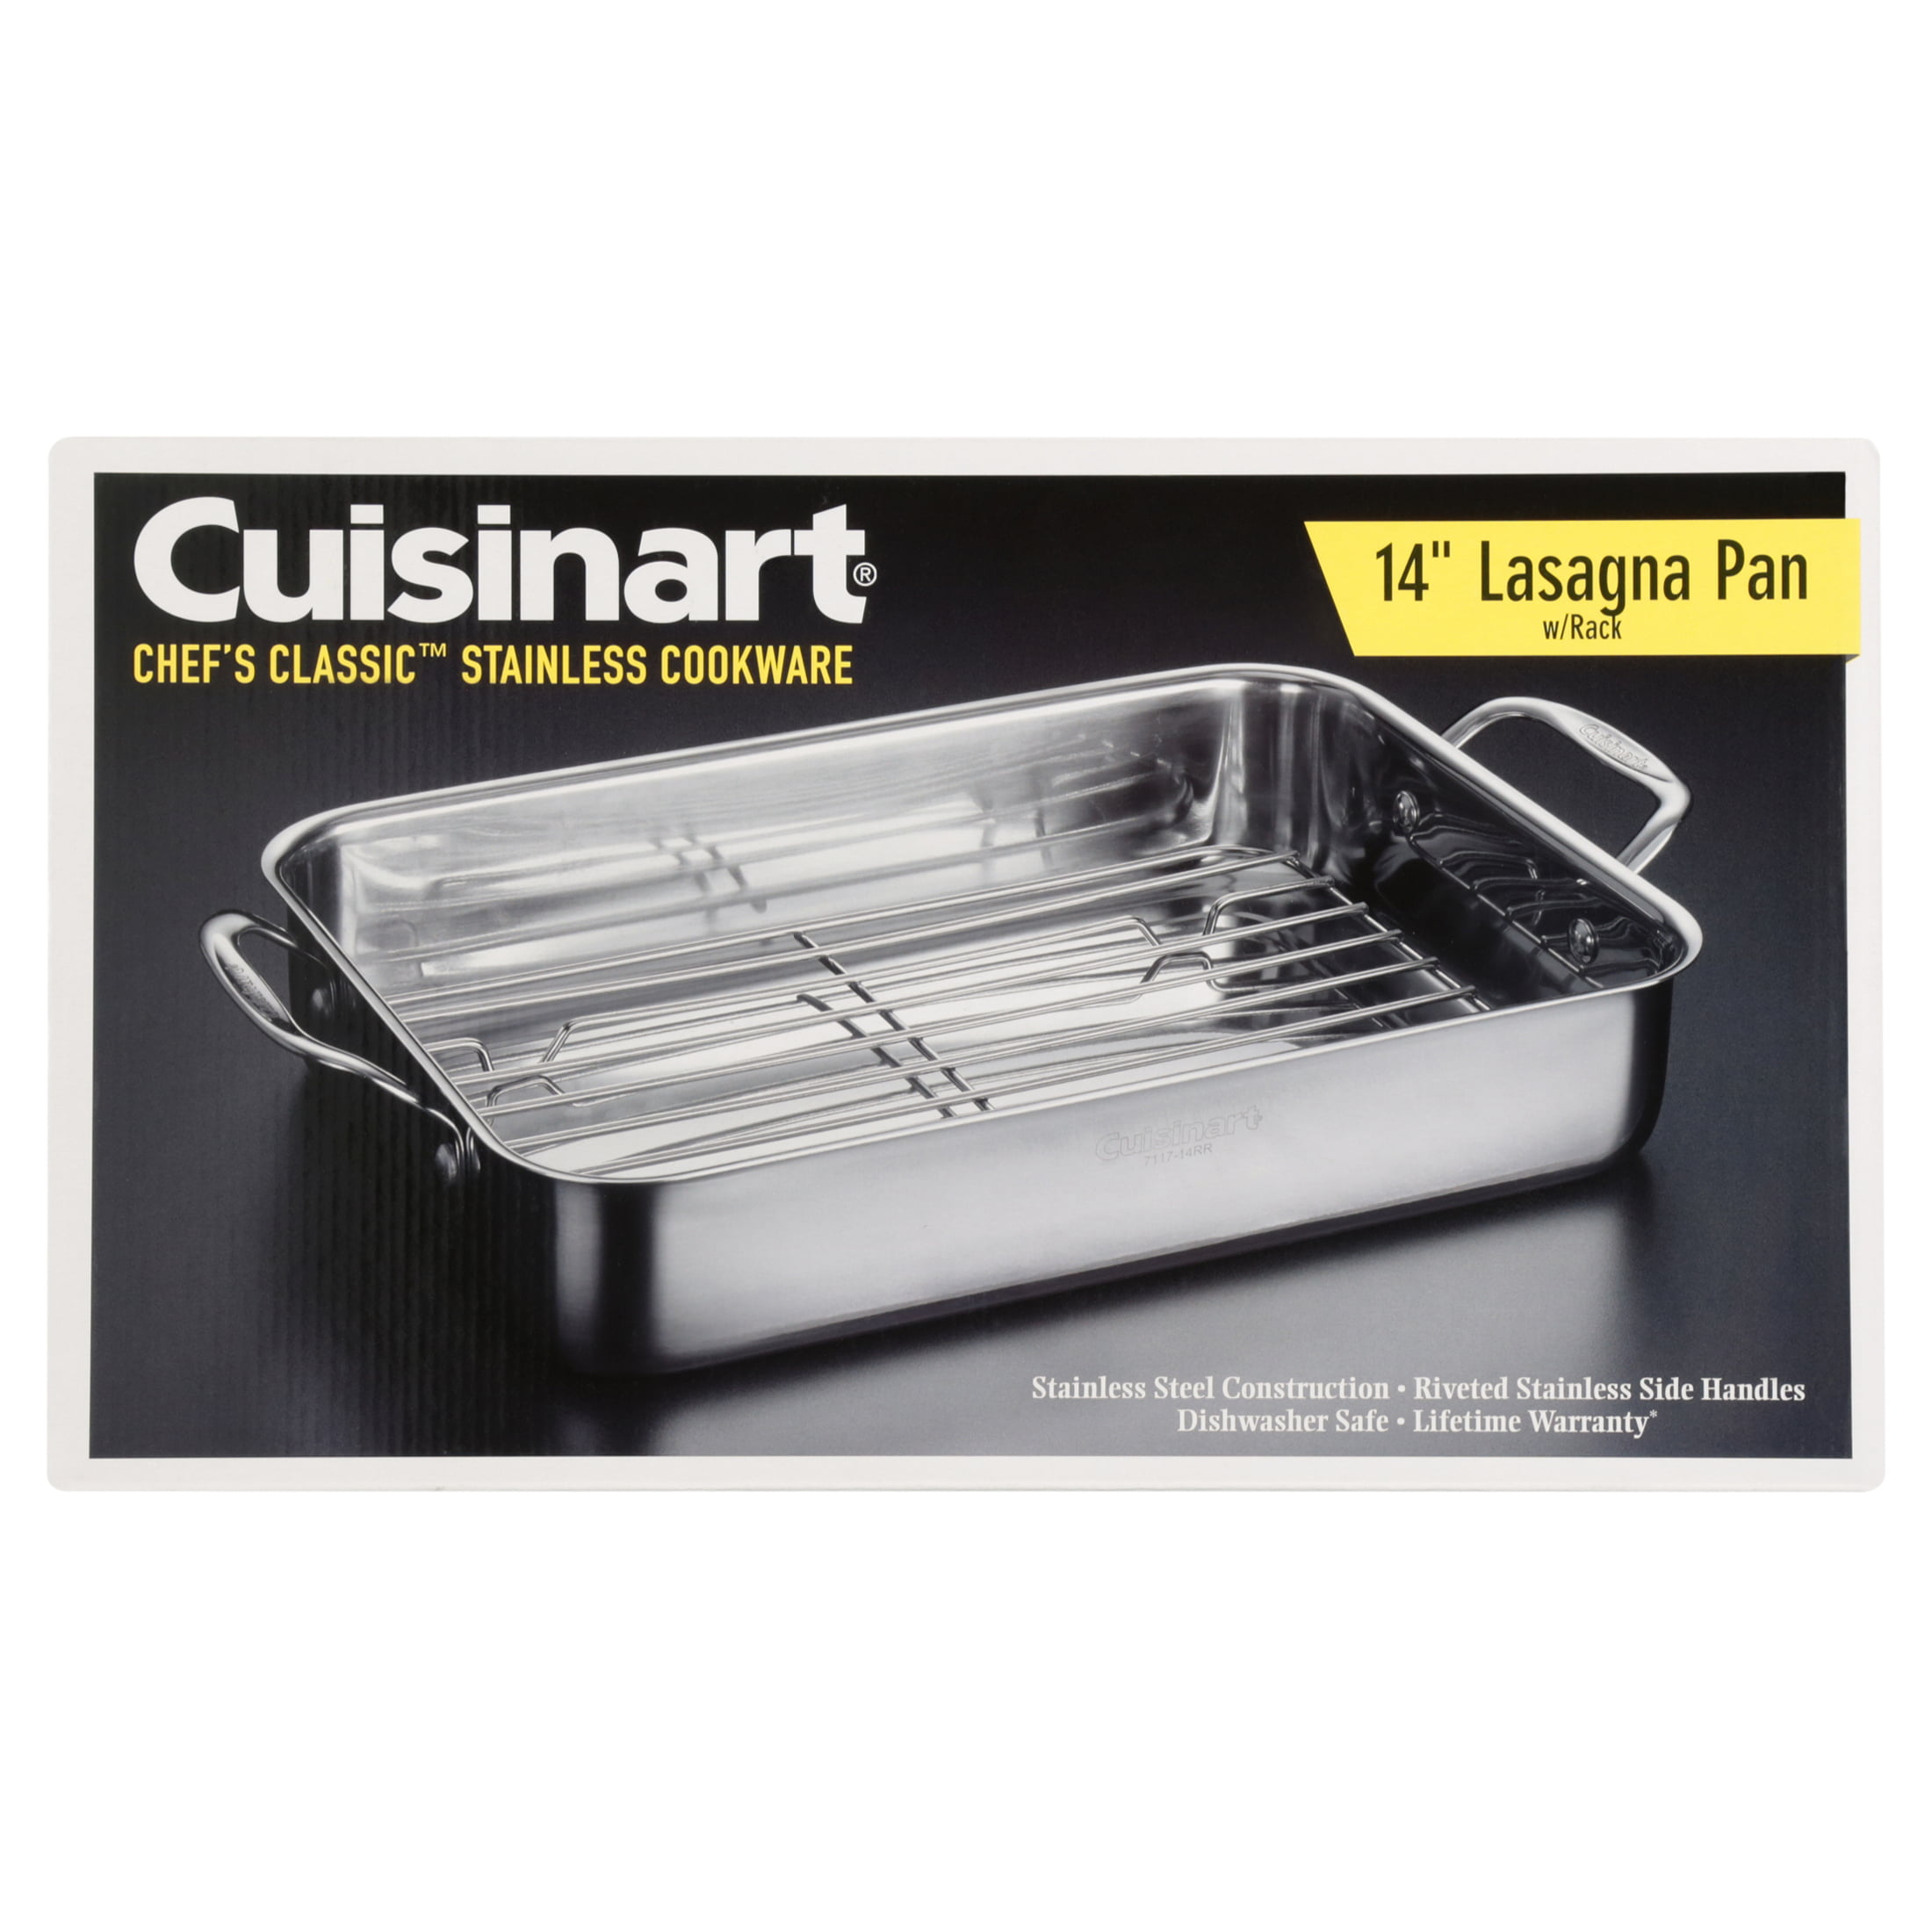 Cuisinart Chef's Classic Stainless 13.5 Lasagna Pan 